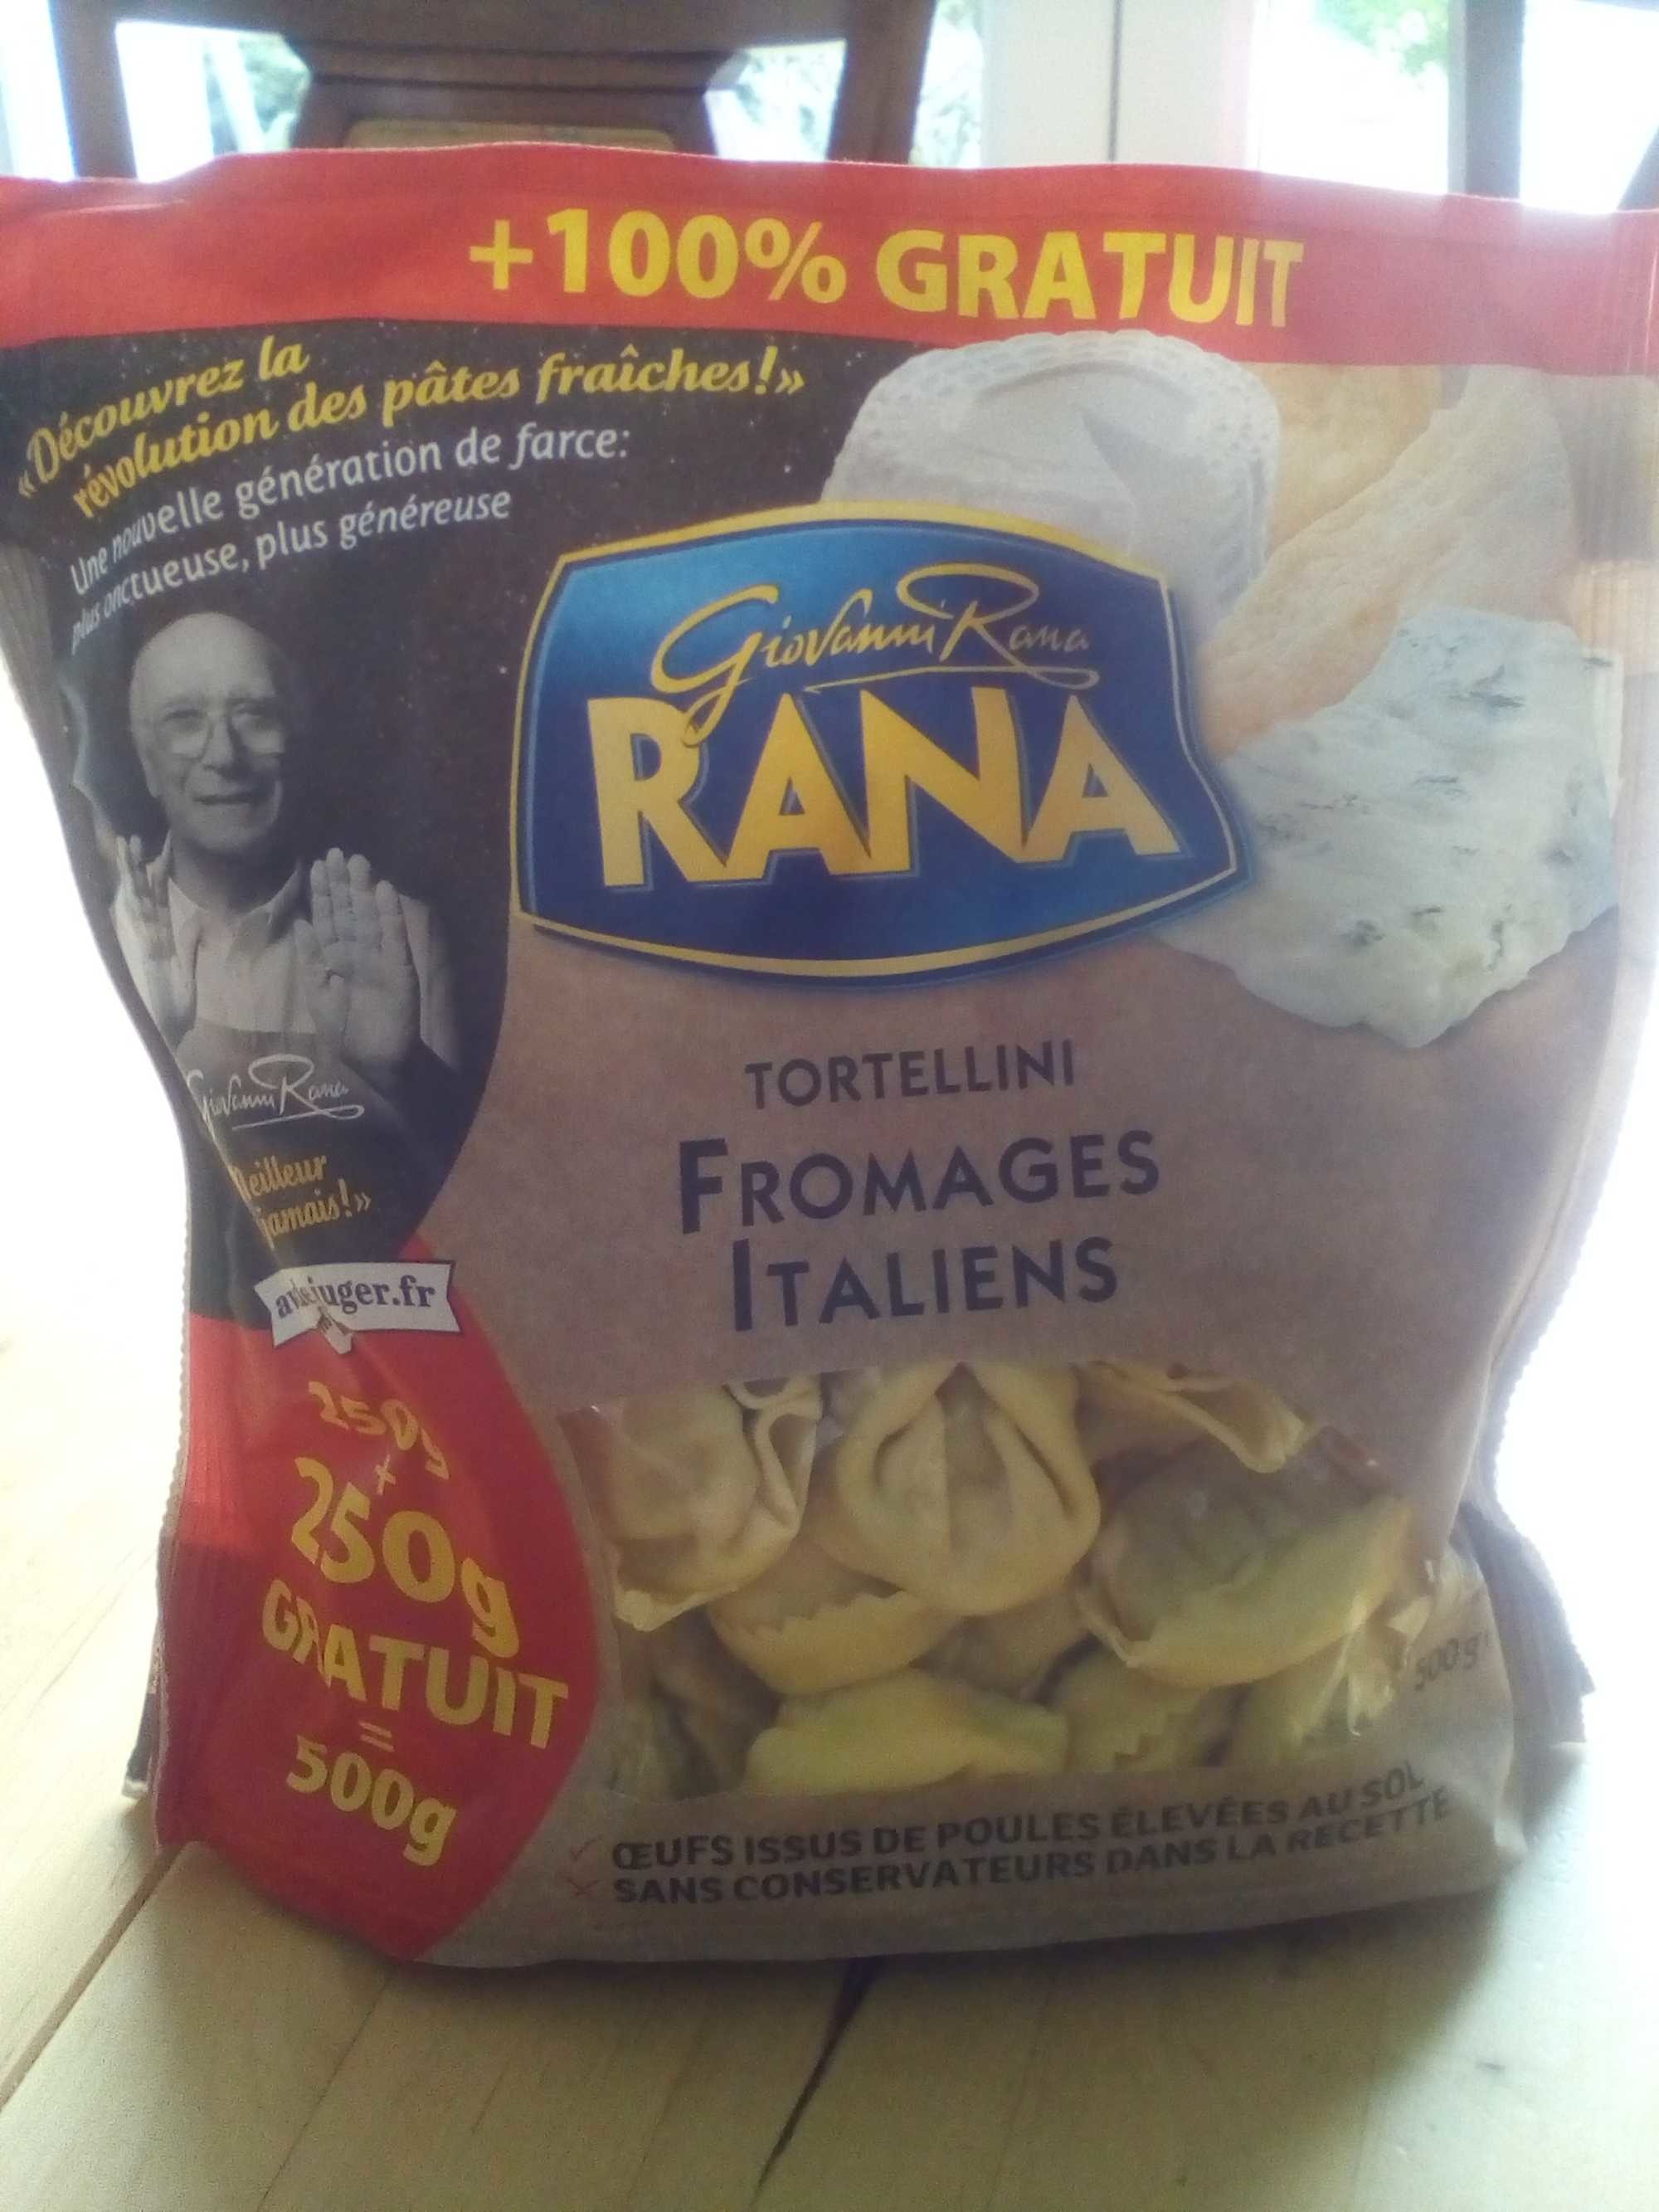 Tortellini fromages italiens - Product - fr